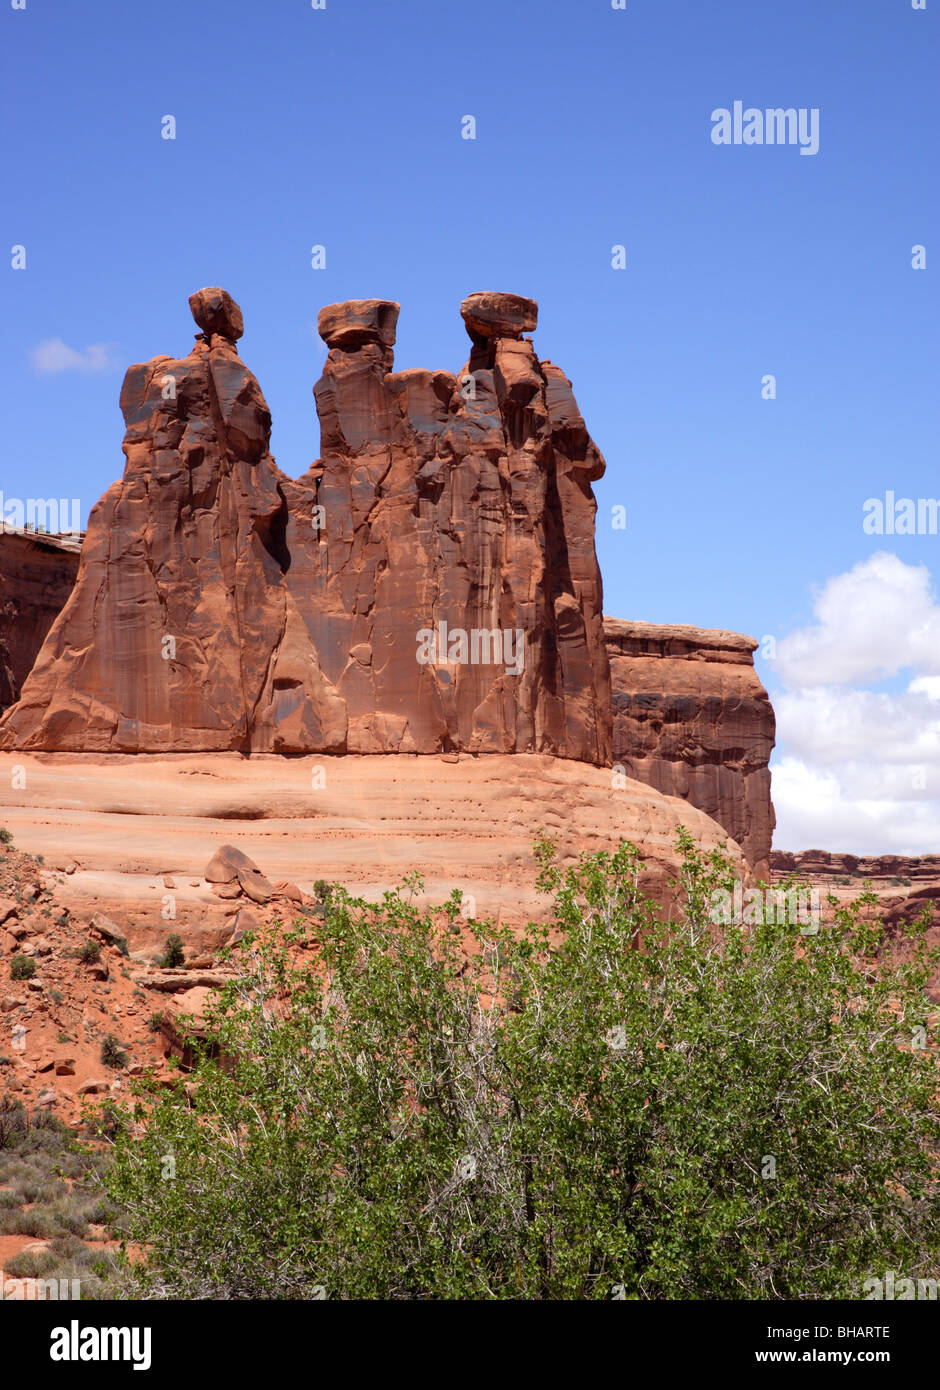 Red sandstone stacks known as 'The Three Gossips' in Arches National Park, Utah, U.S.A. Stock Photo